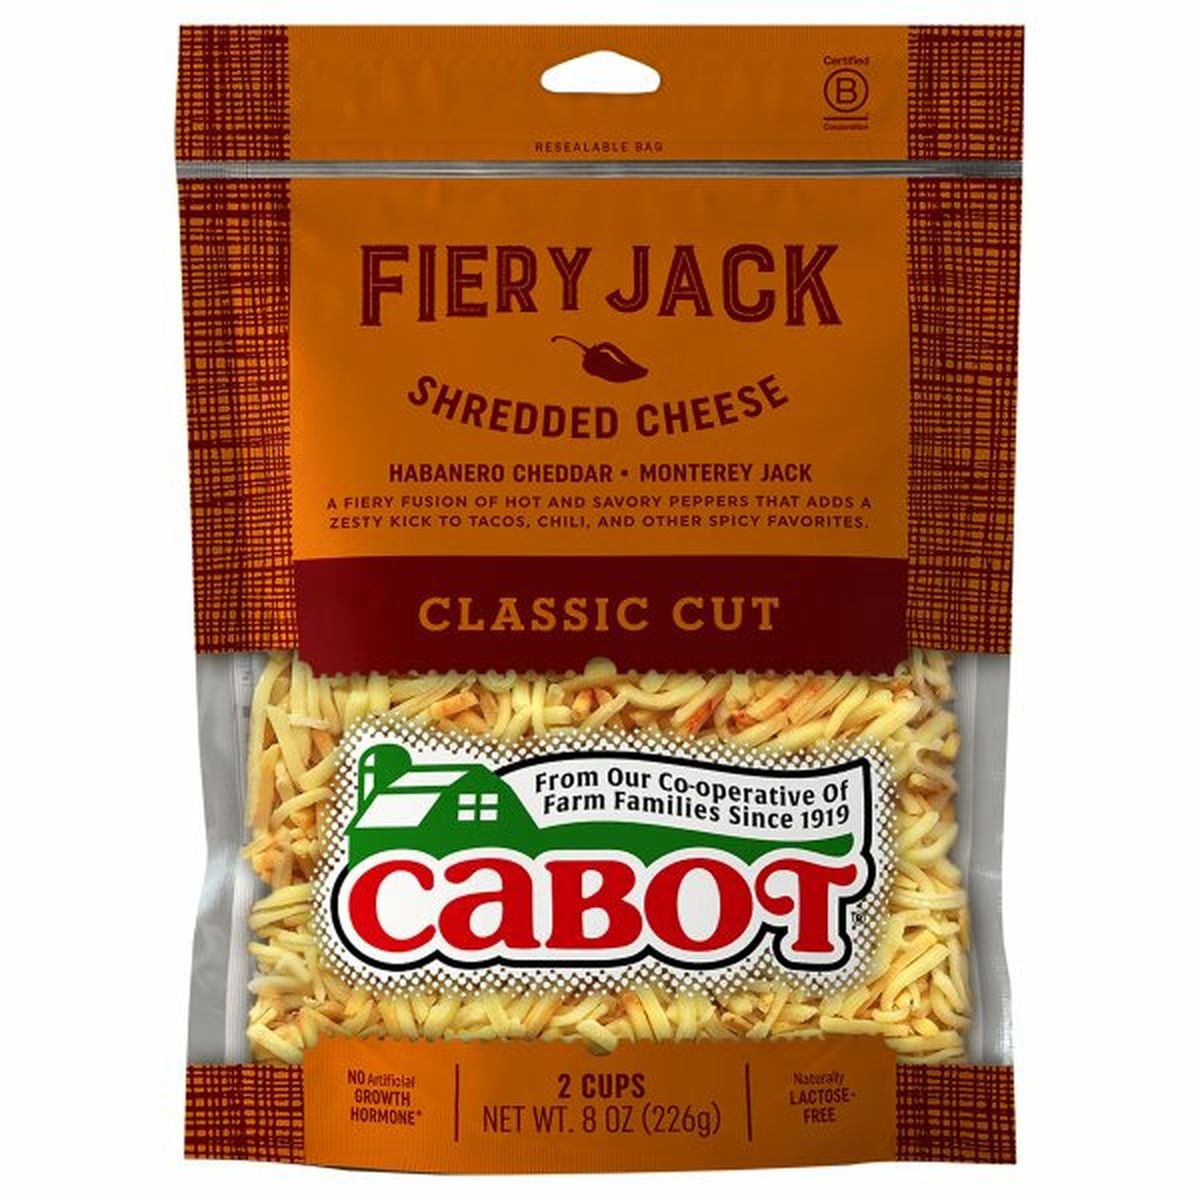 Calories in Cabot Shredded Cheese, Fiery Jack, Classic Cut